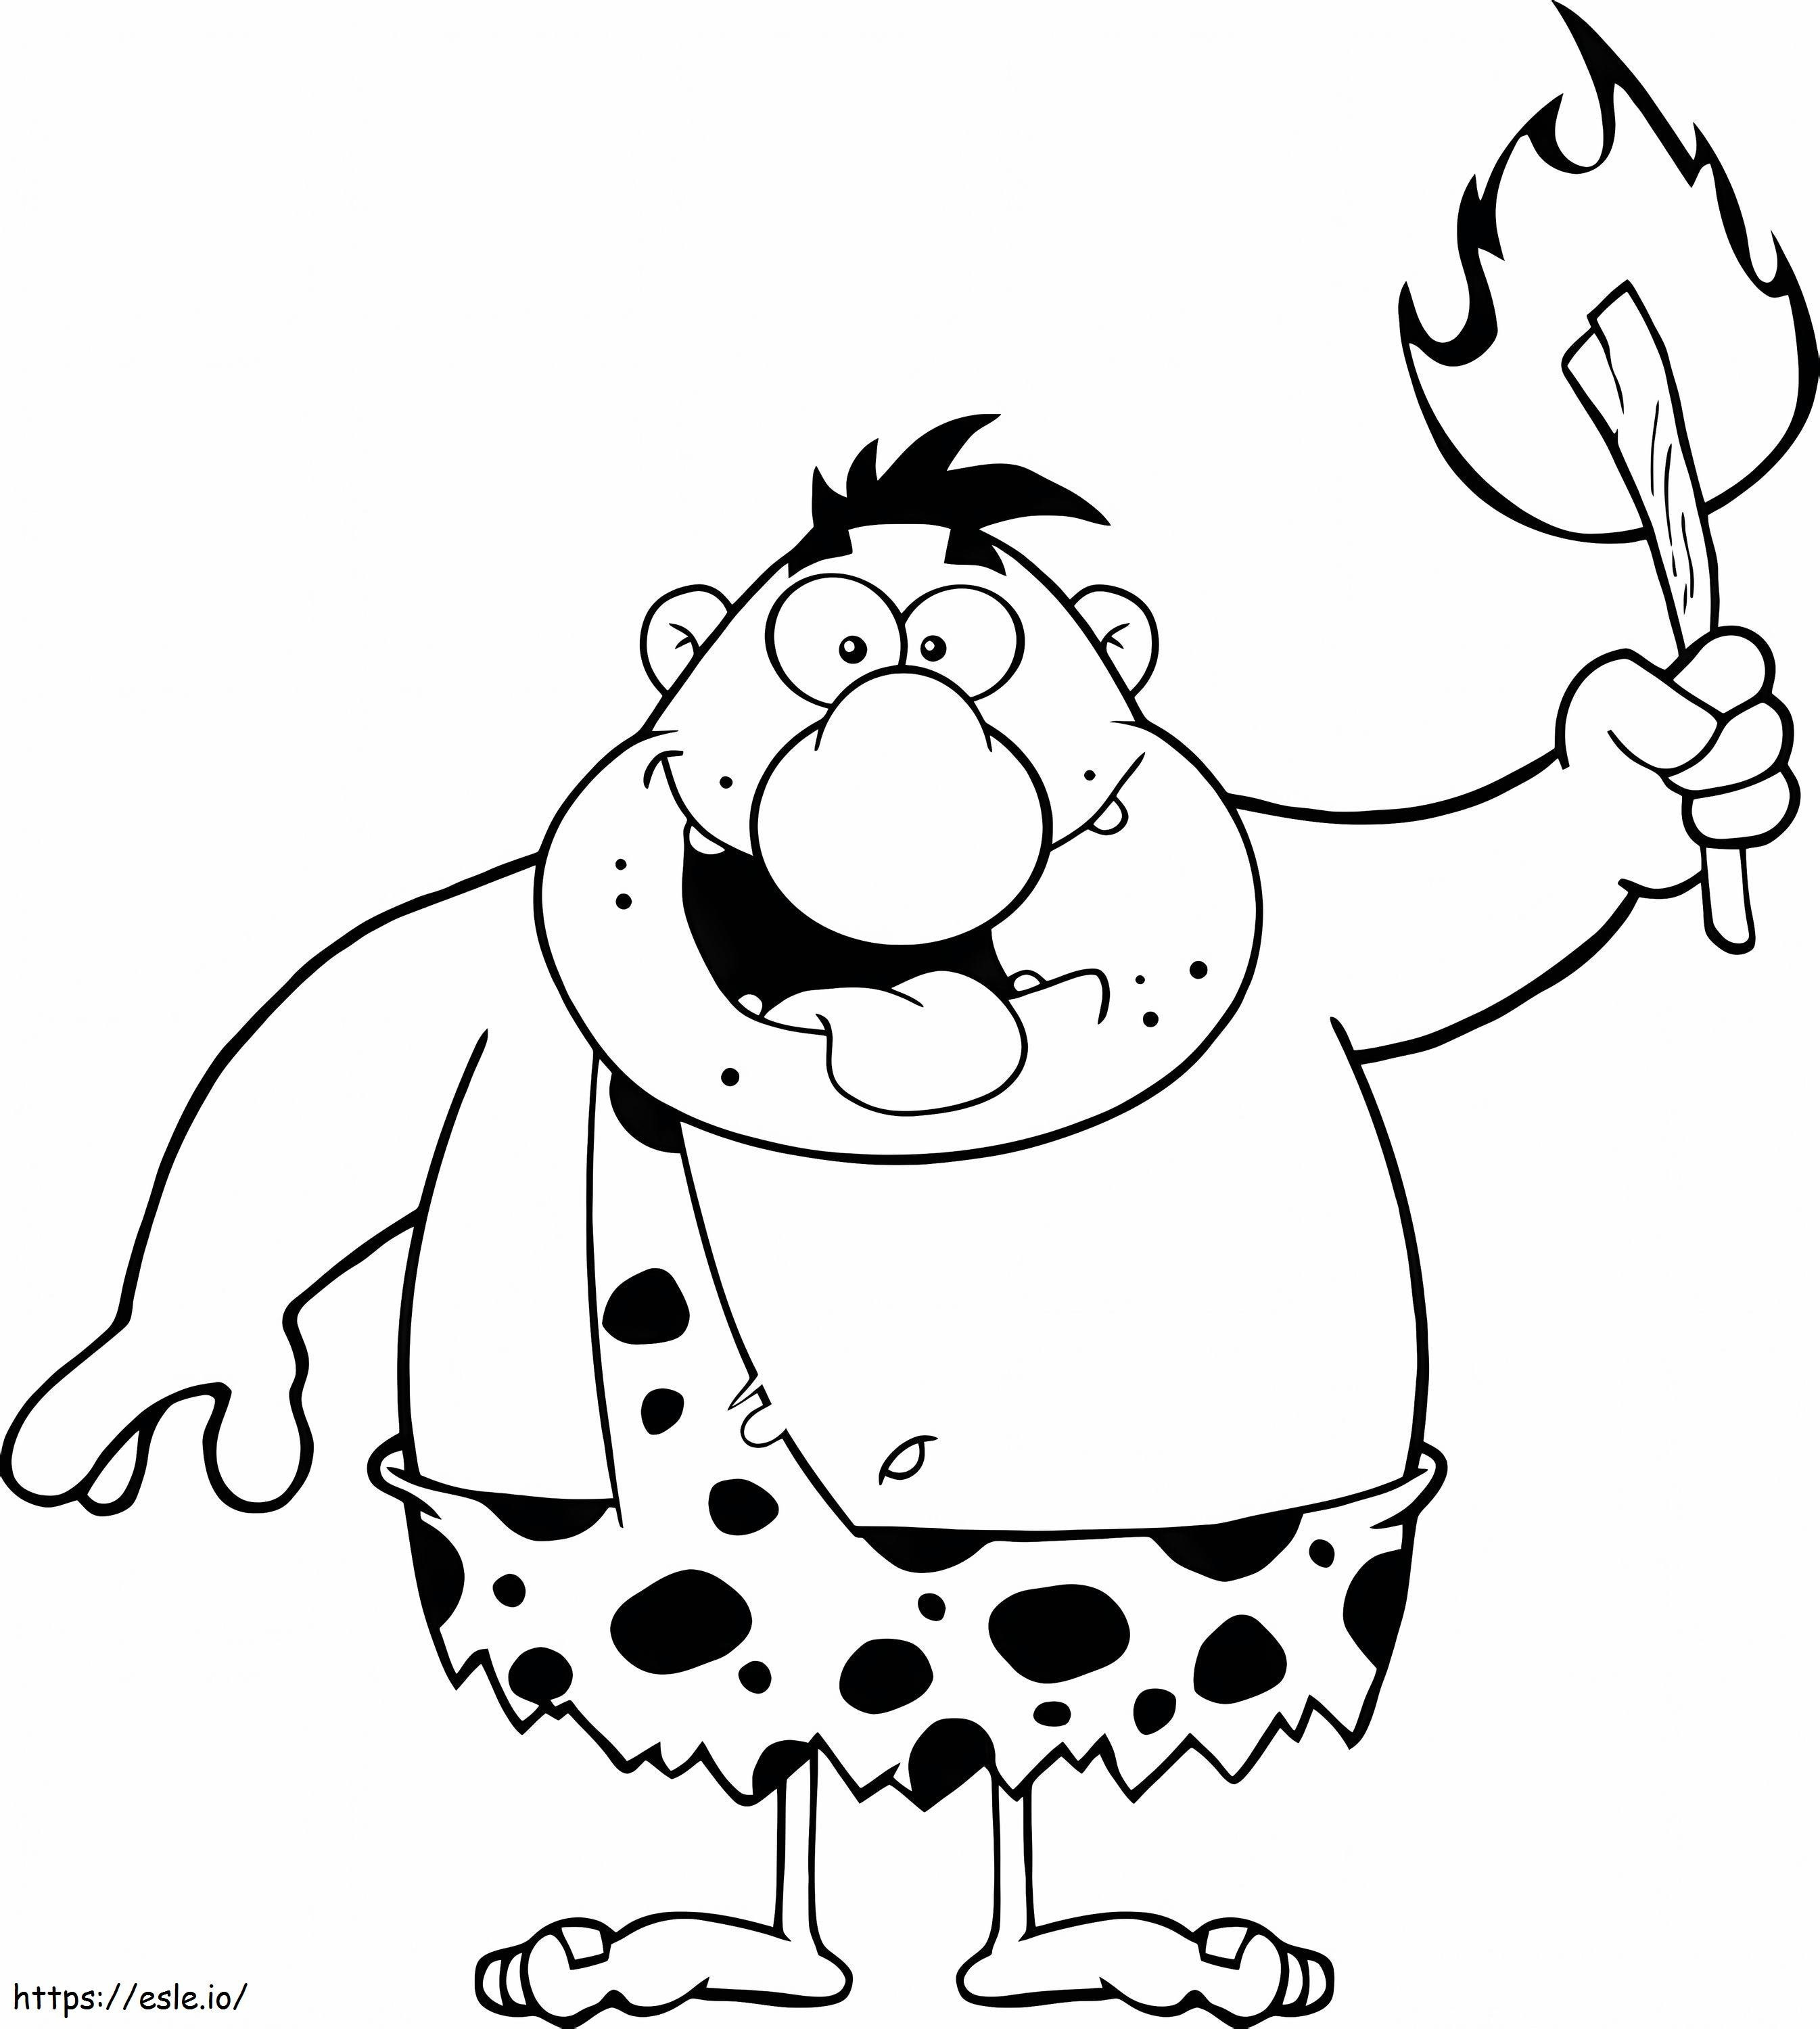 1529118497 Fat Caveman Holding A Torch coloring page